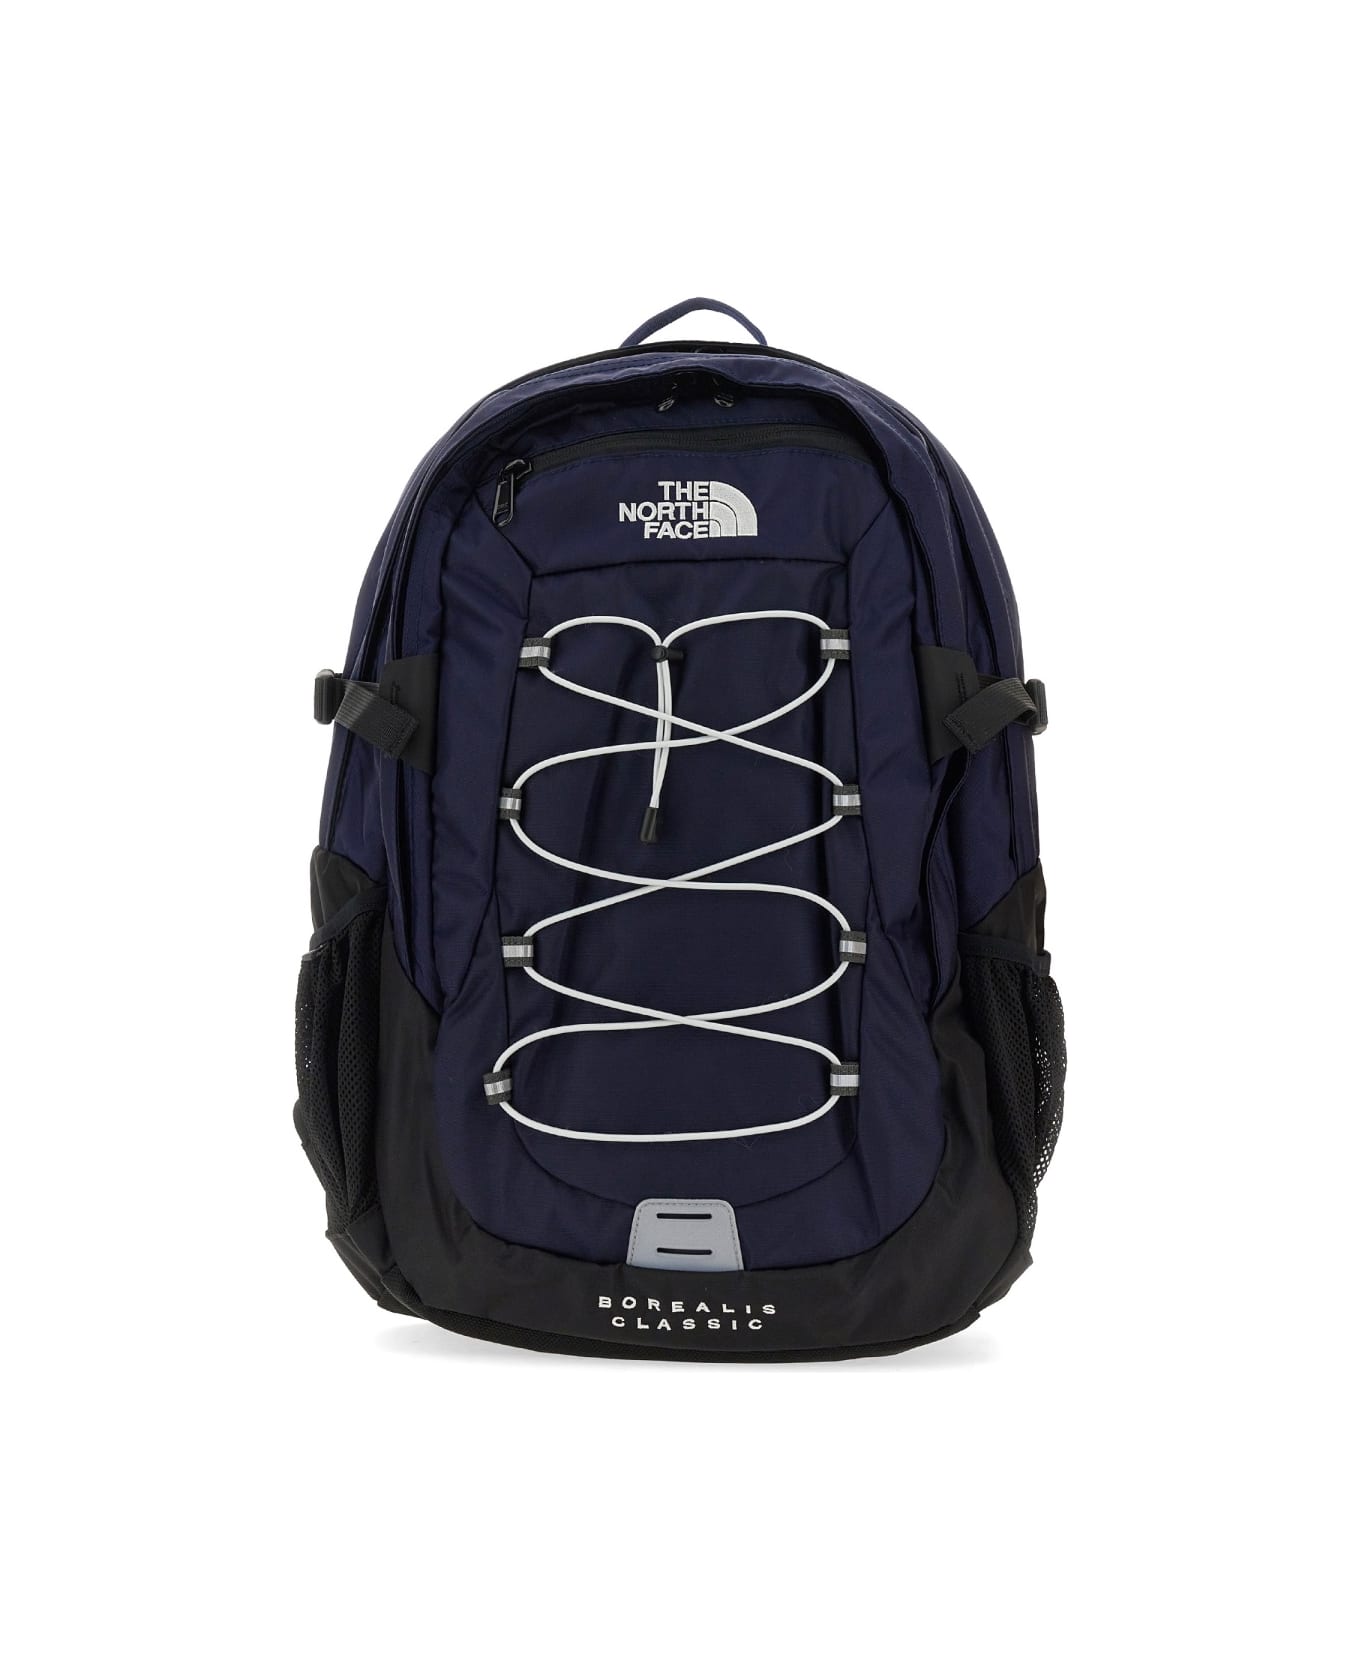 The North Face Borealis Classic Backpack - BLUE